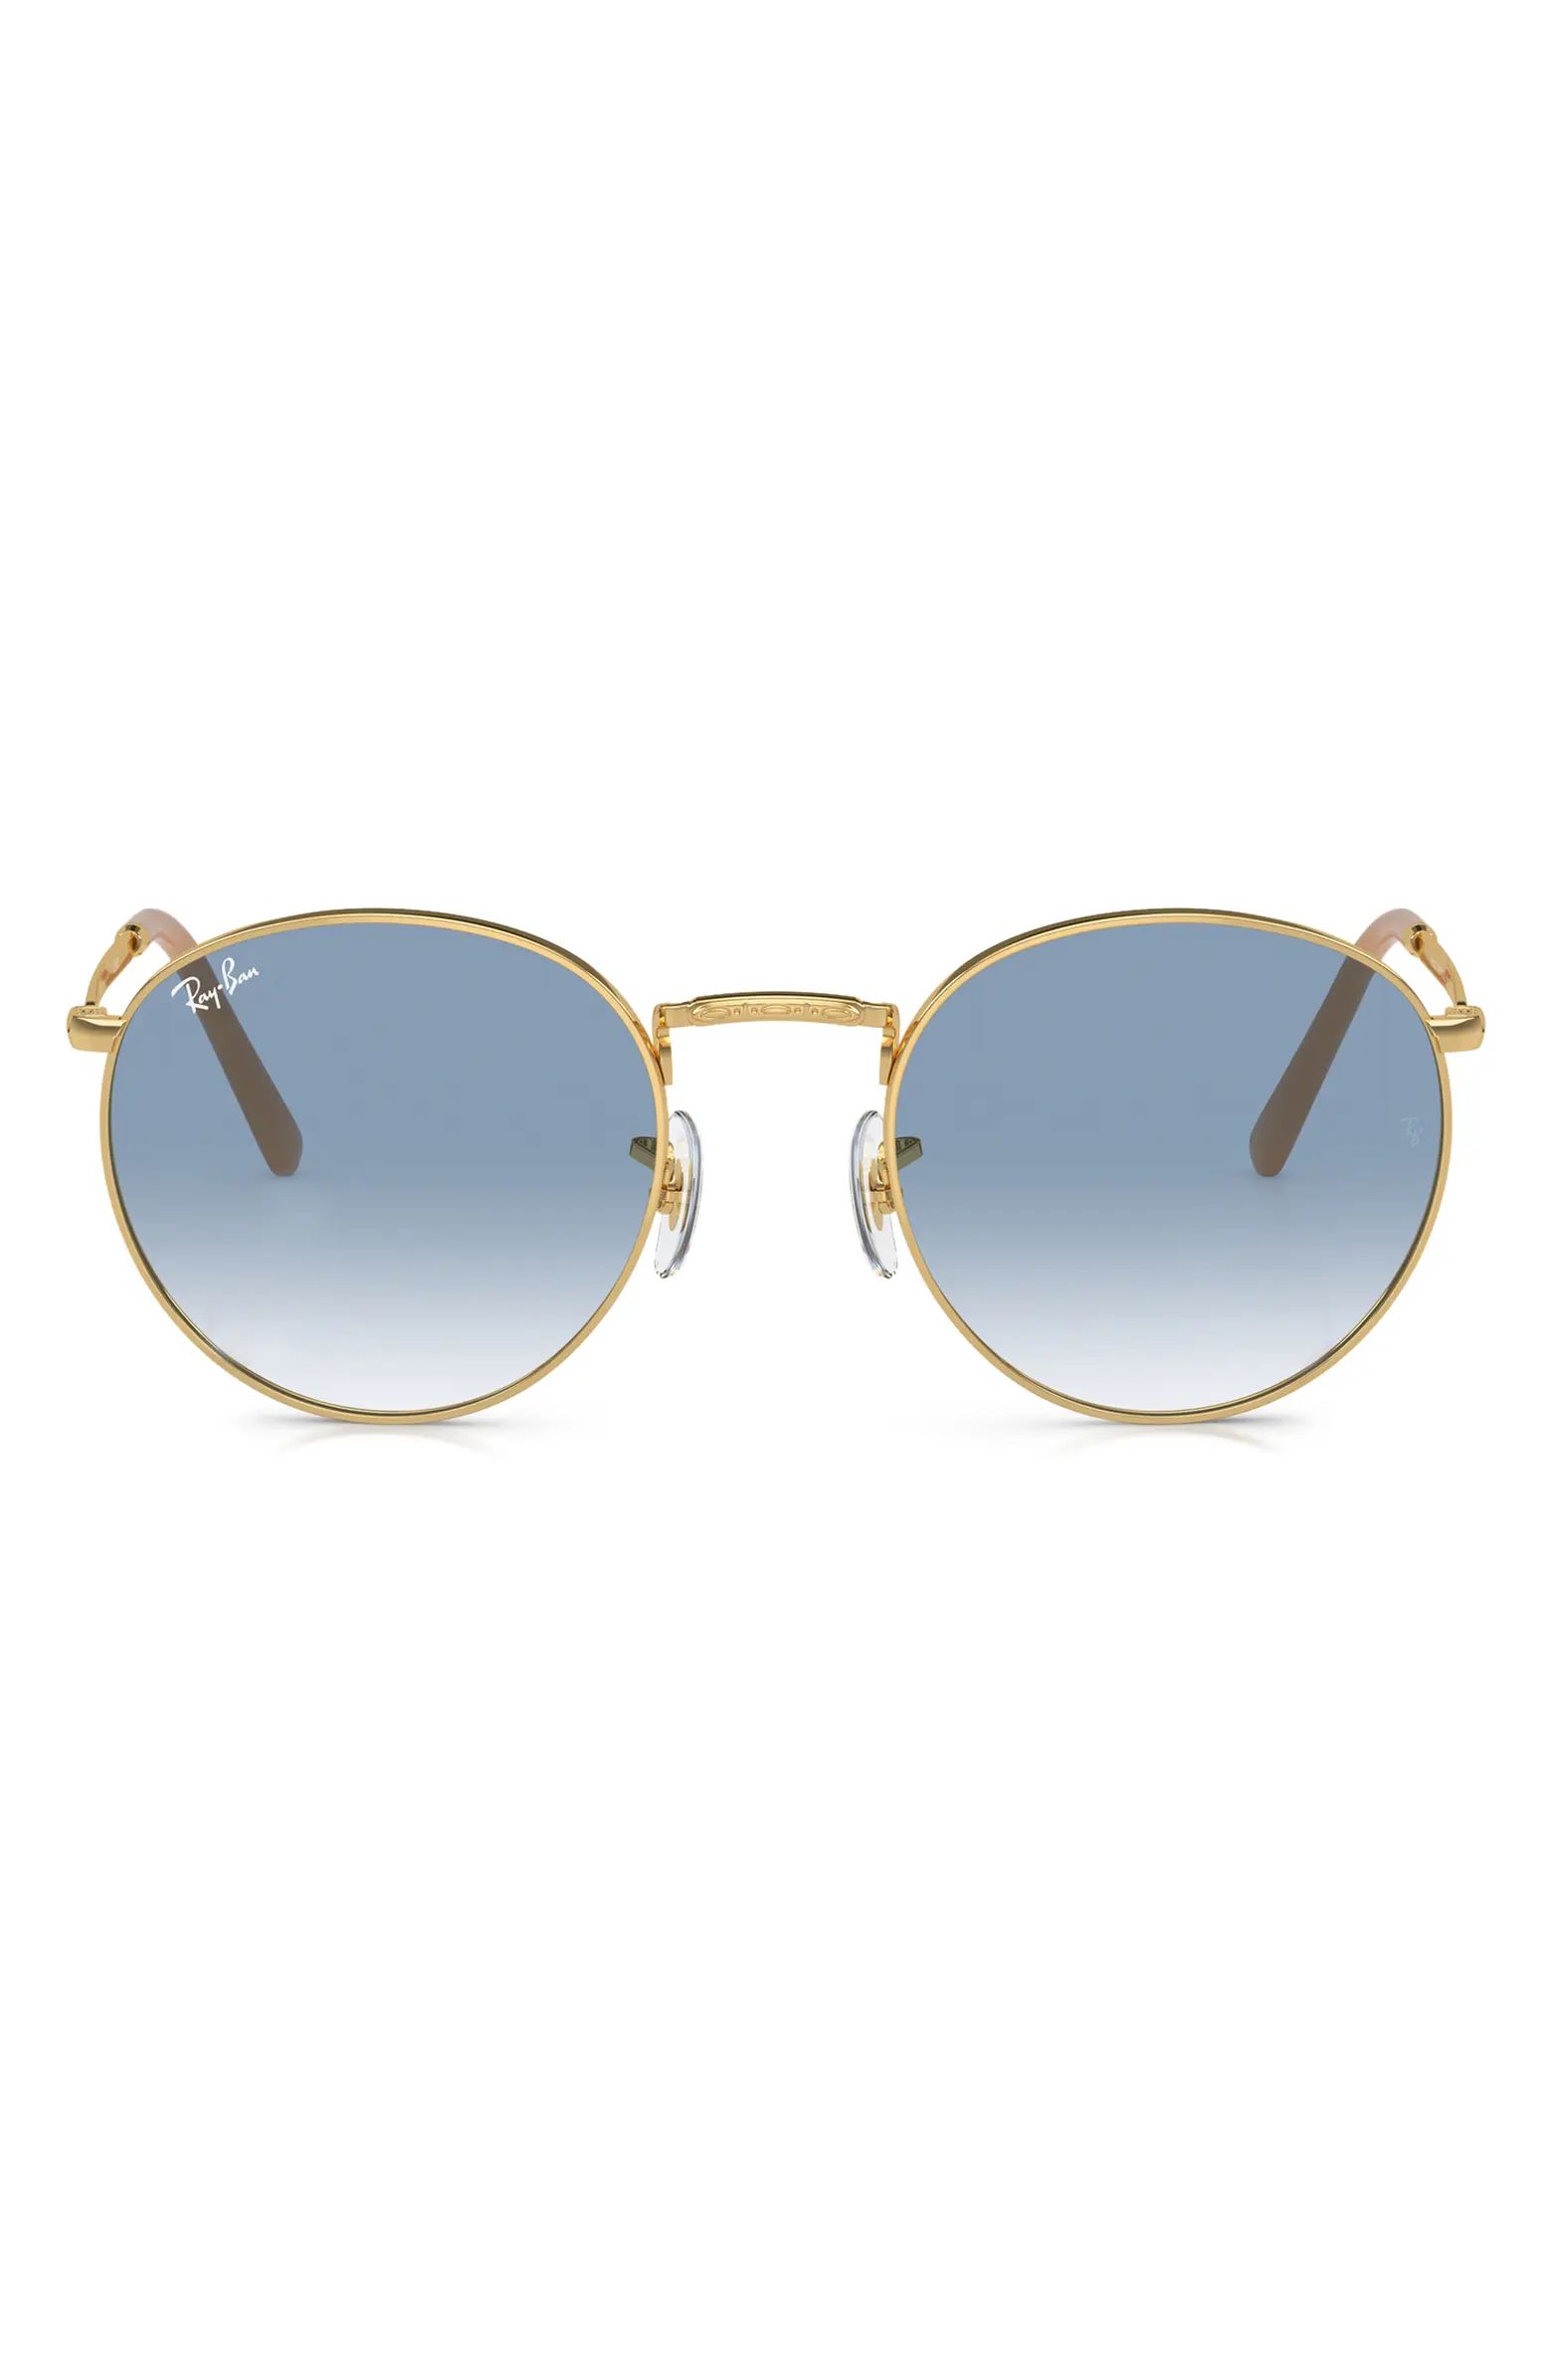 Ray-Ban New Round 50mm Phantos Sunglasses | Nordstrom | Nordstrom